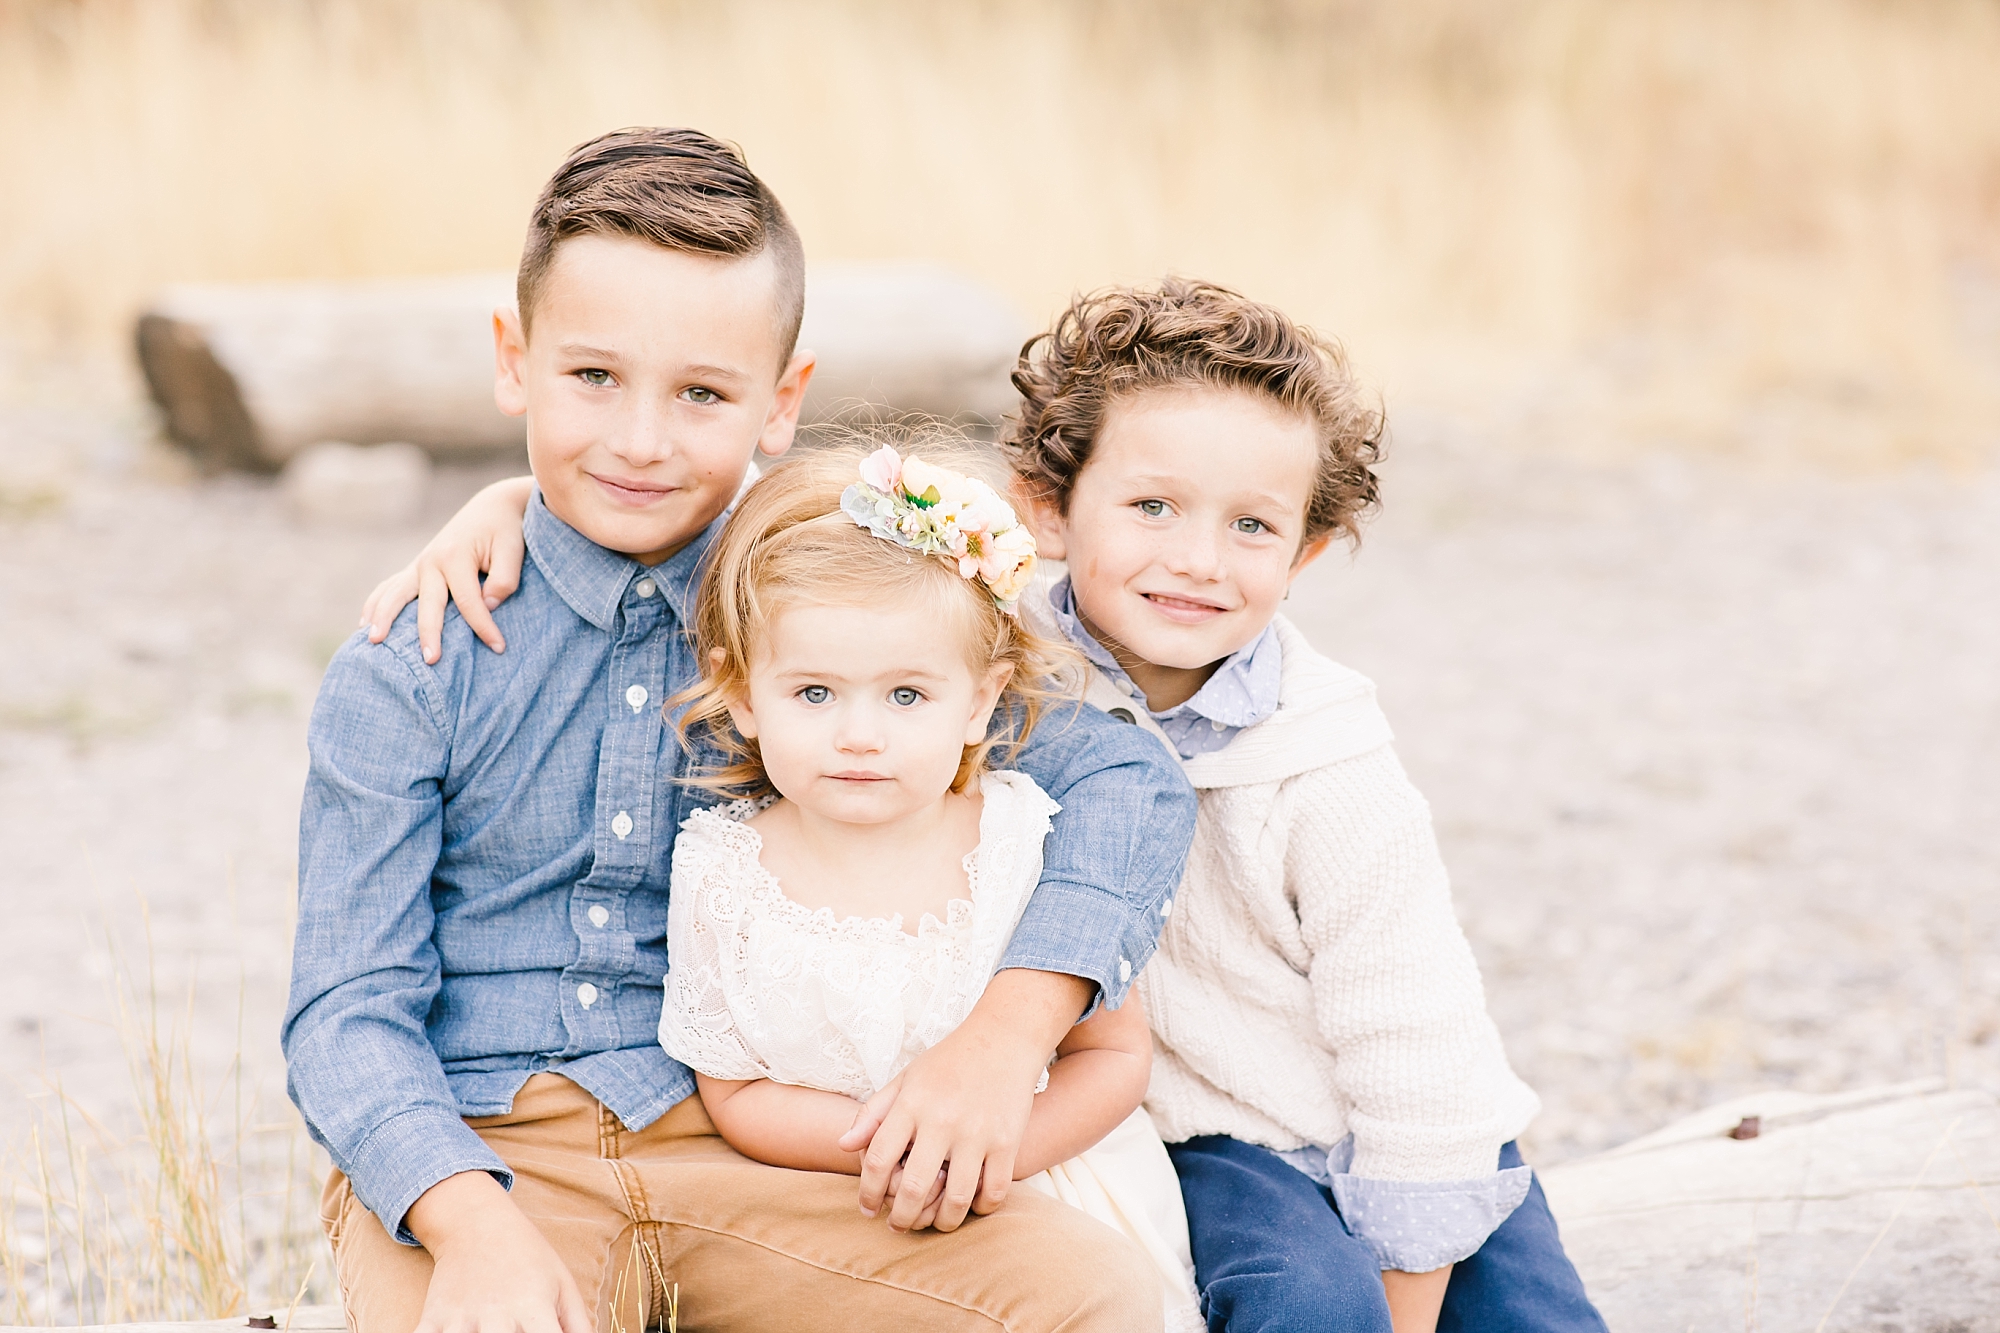 Getting your outfits together for family photos can be so hard! Layering is one of my favorite ways to bring some more texture and visual interest into the photograph. It's also helpful to keep to the basics!